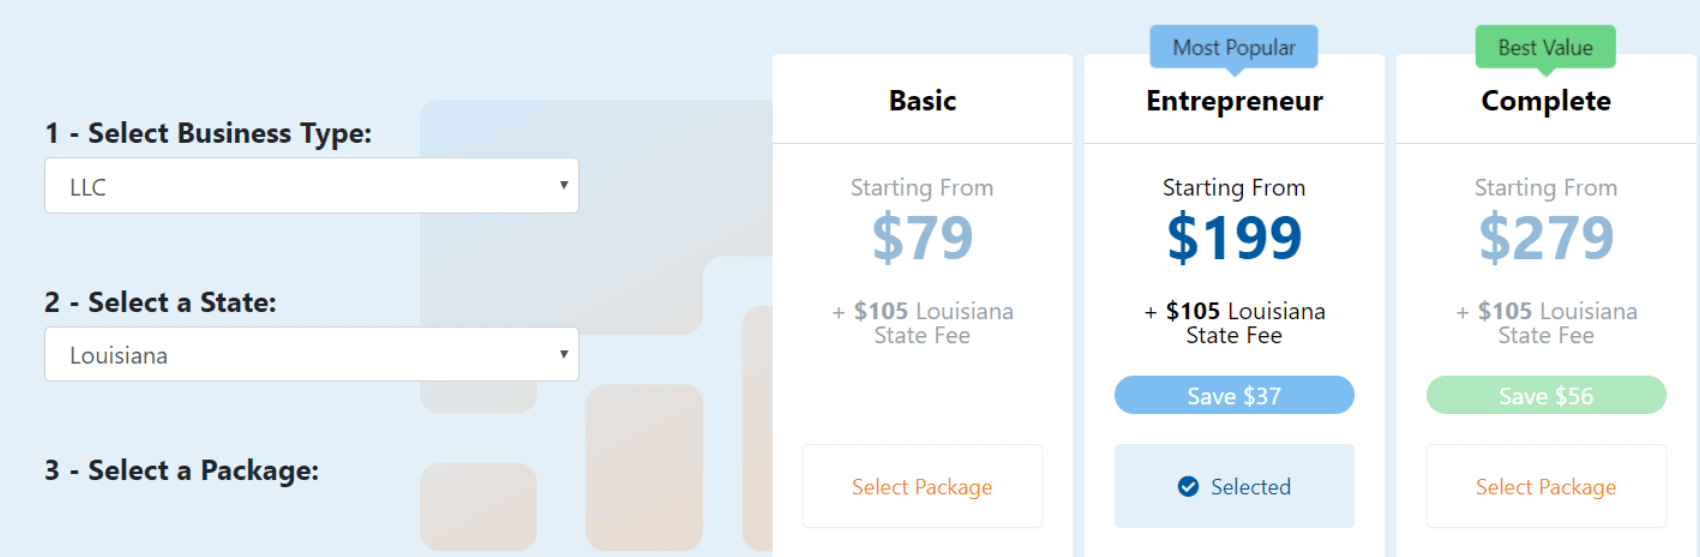 MyCompany Works Pricing plans